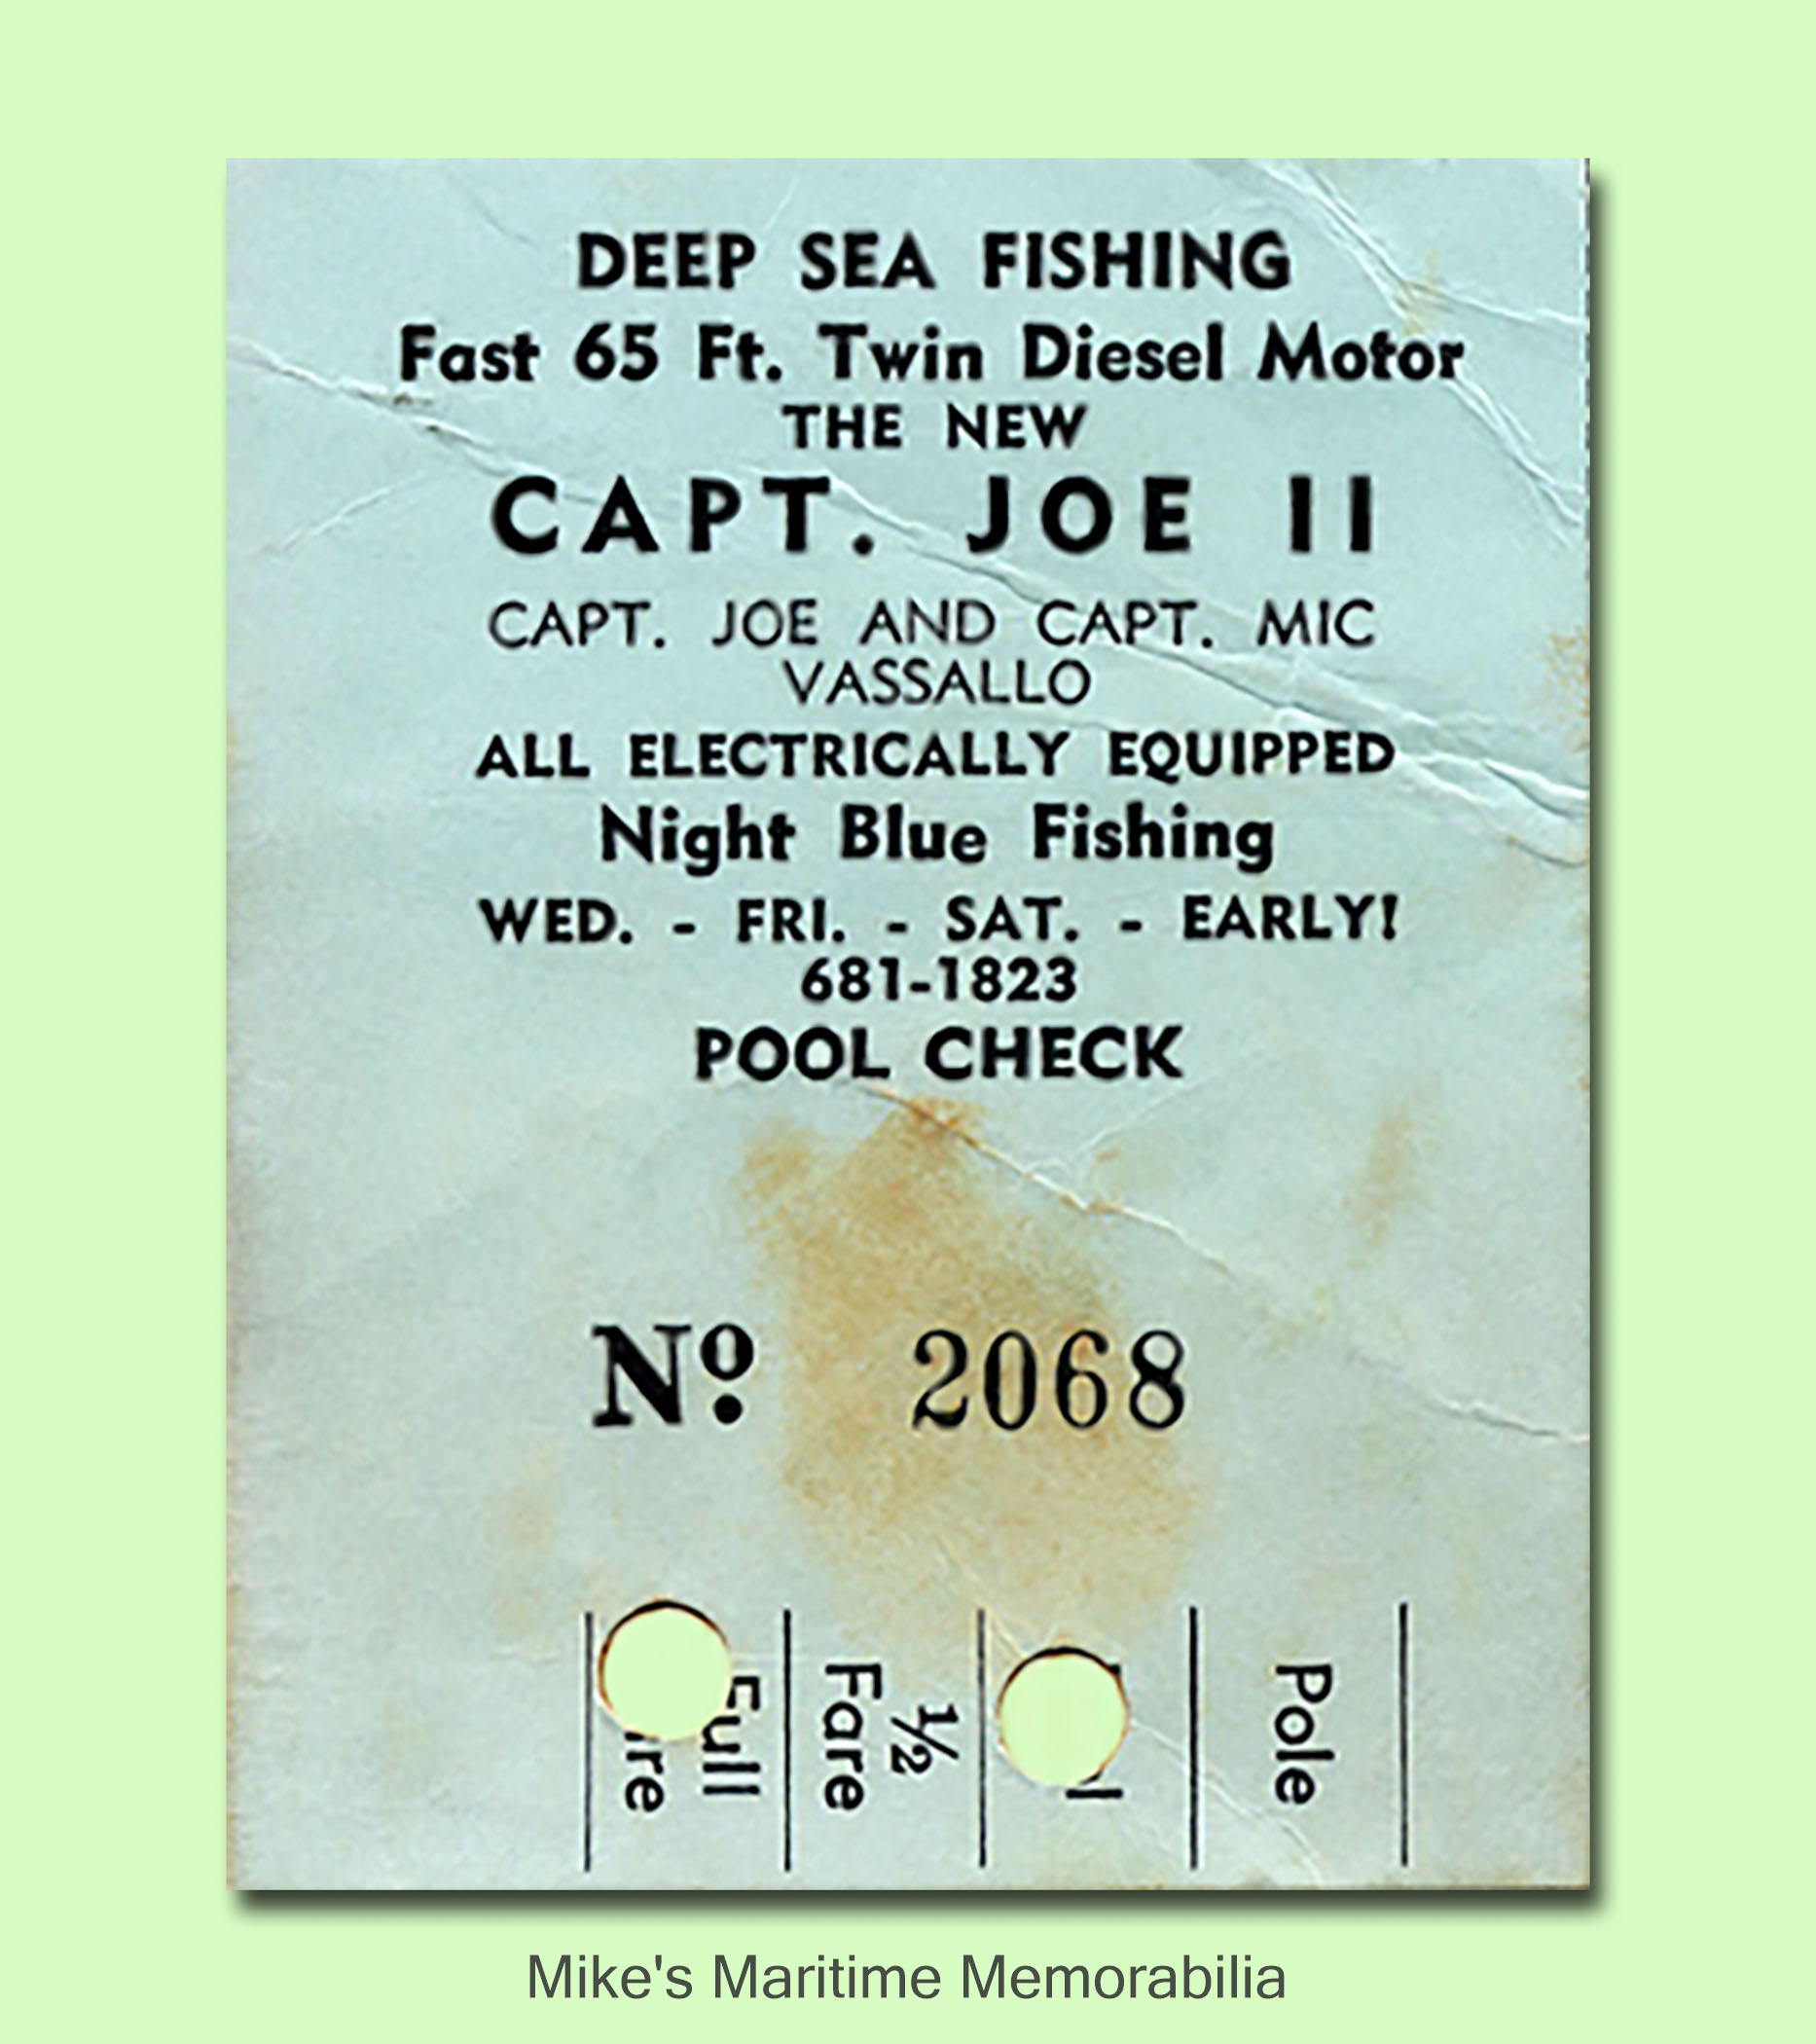 CAPTAIN JOE II Fare Ticket, Belmar, NJ – 1979 The "CAPT. JOE II" sailed from Belmar, NJ and was owned and operated by father and son Captains Joseph and Mickey Vassallo. Captain Mickey Vassallo introduced late afternoon/early evening 'magic hours' Whiting (Silver Hake) fishing to the party boat fleet. The Whiting, the "CAPTAIN JOE II" and Captain Mickey are all gone now, but the innovation of 'magic hours' fishing still continues to be a favorite among local anglers.